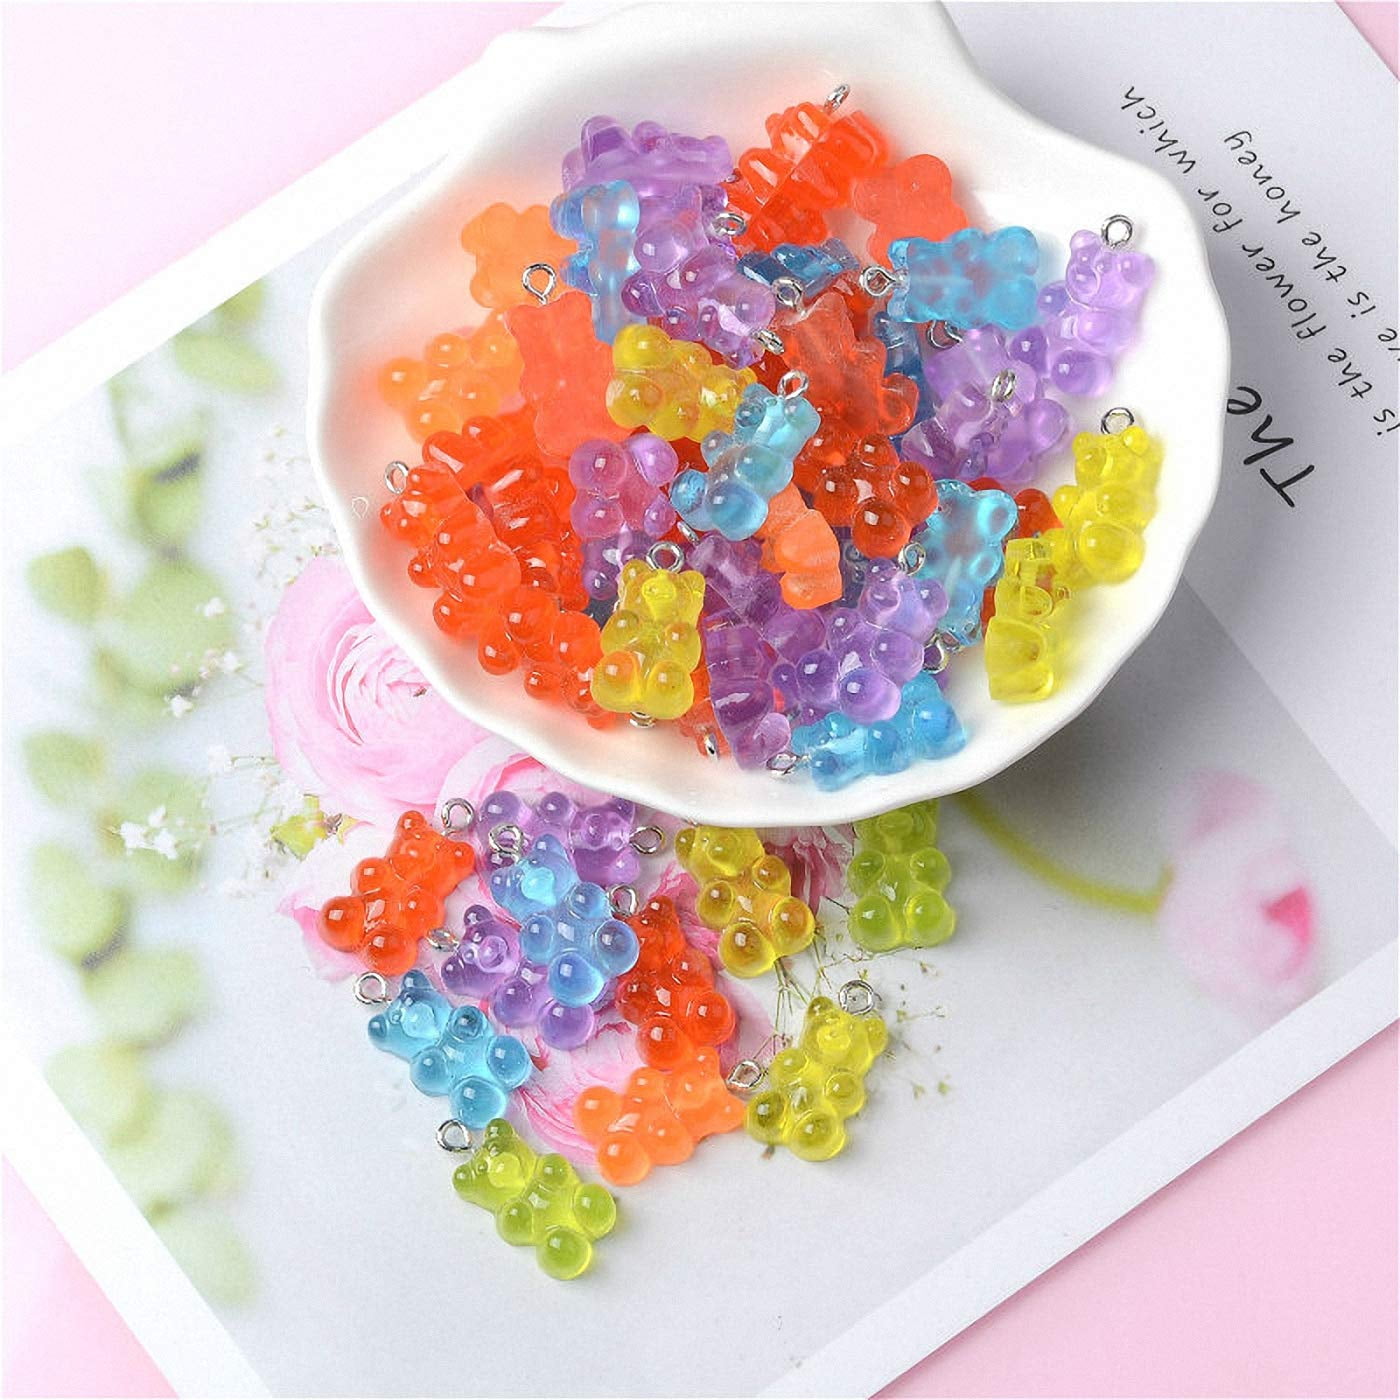 30Pieces Slime Charms Mixed Resin Chocolate Fruit Candy Donut Beads Slime  Filler Making Supplies For DIY